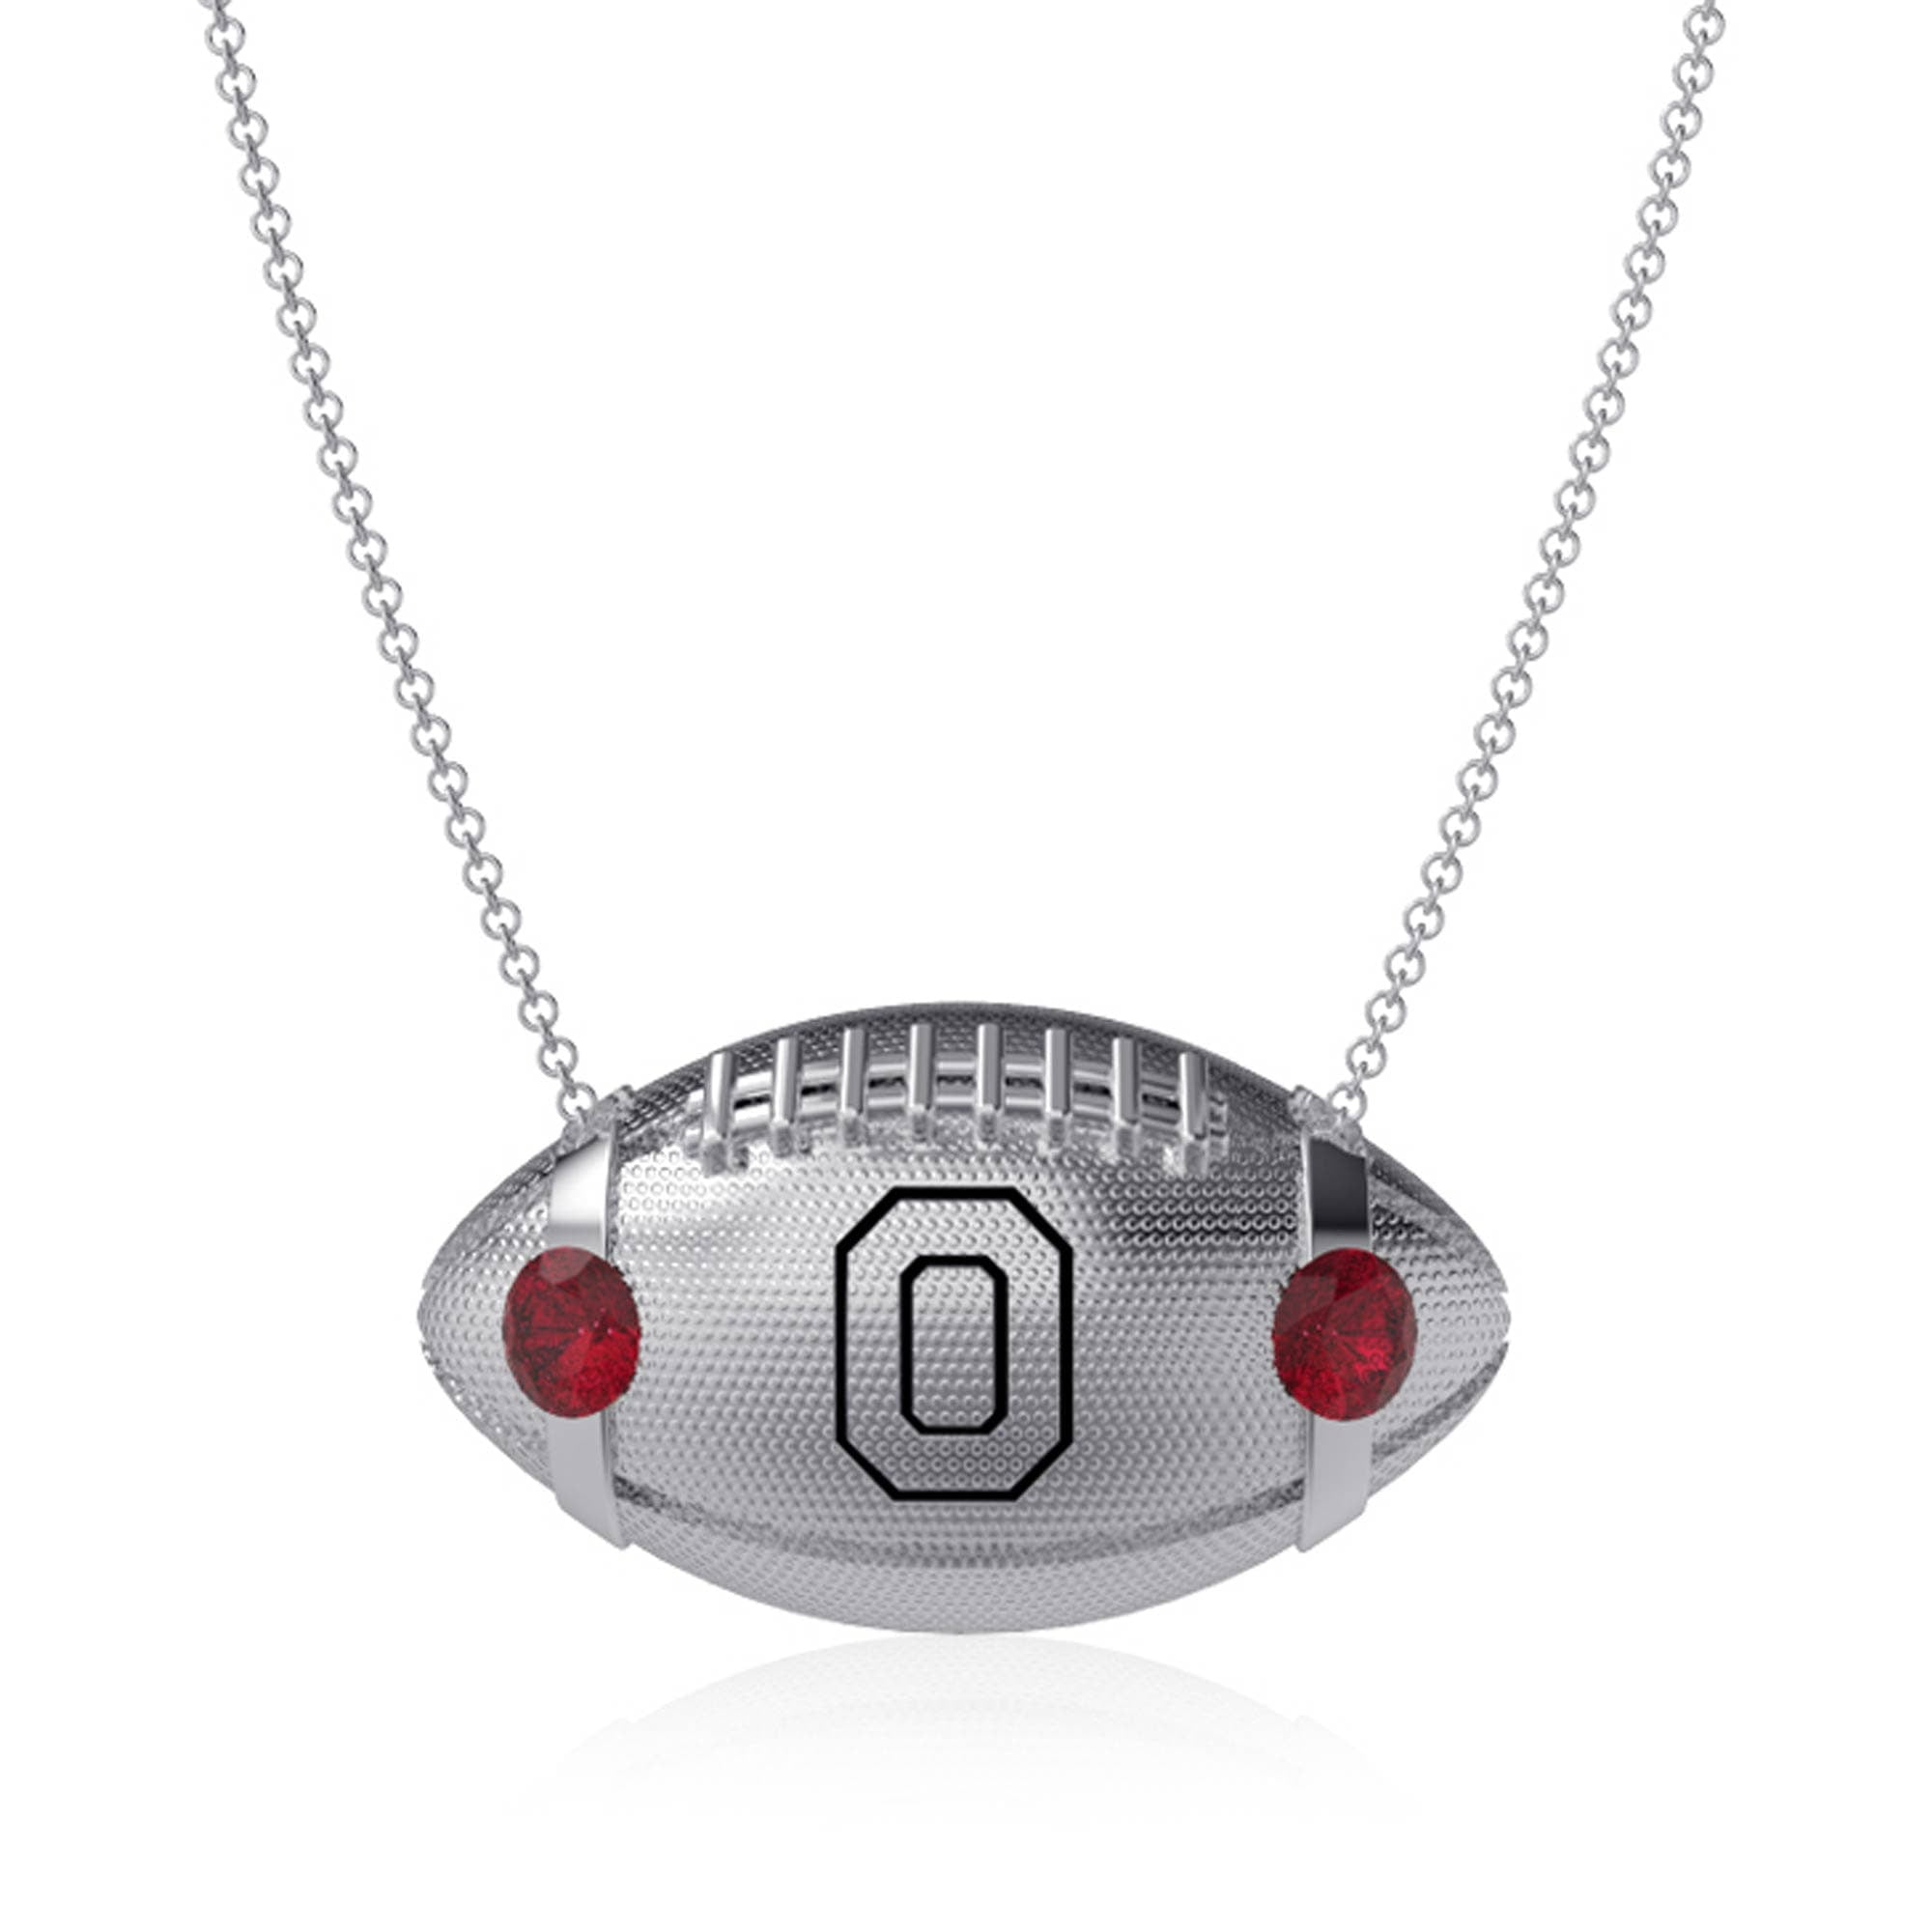 Mens Ohio State University Buckeyes School Letter and Name Logo Pendant Charm for Necklace Chain in 925 Sterling Silver 25 mm x 25 mm 